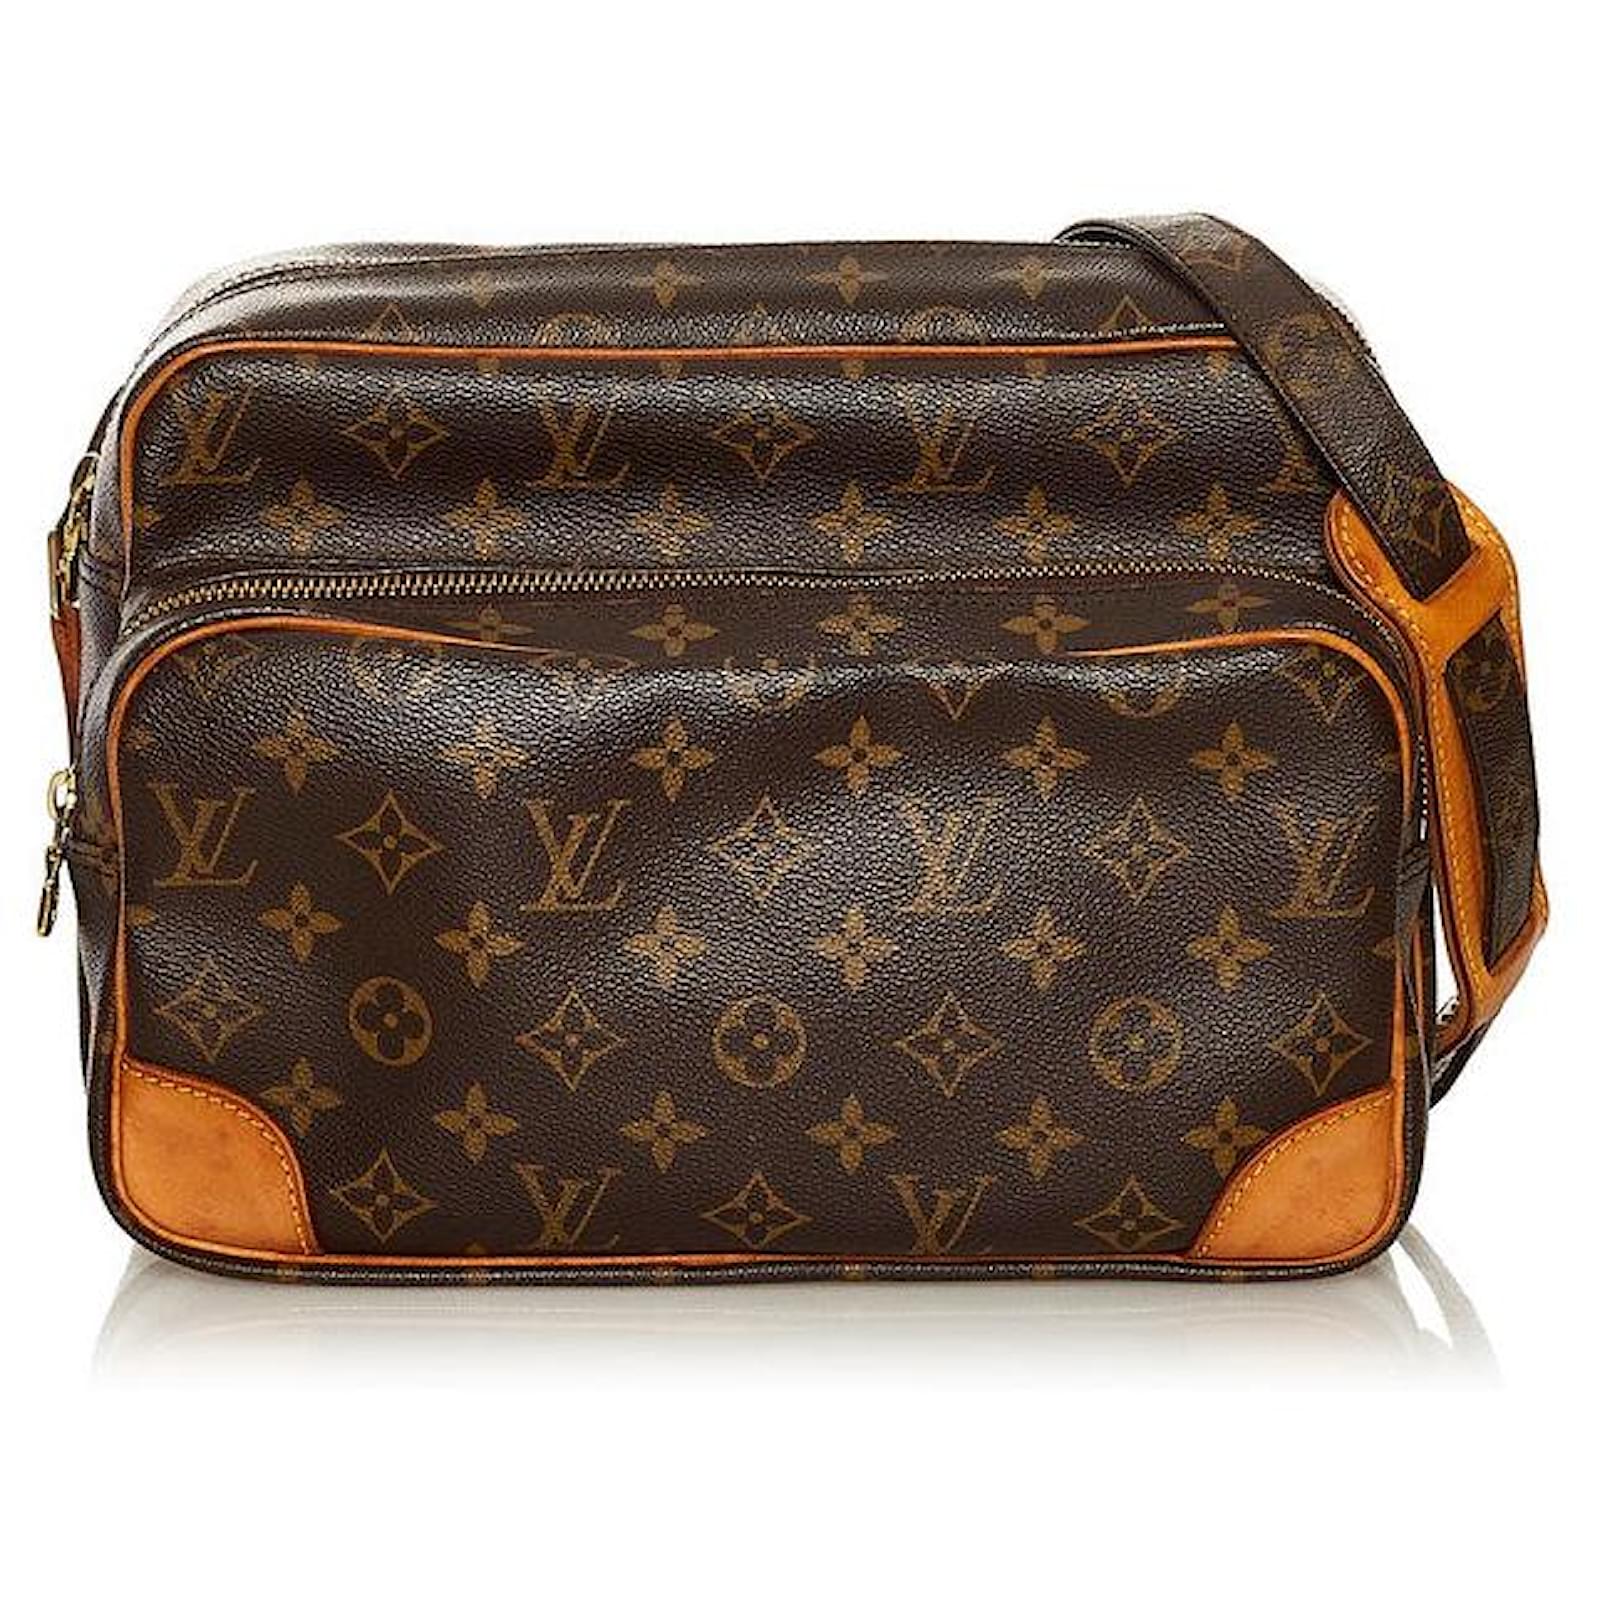 Louis Vuitton Water-Proof Shoulder Bag in Monogram Canvas with